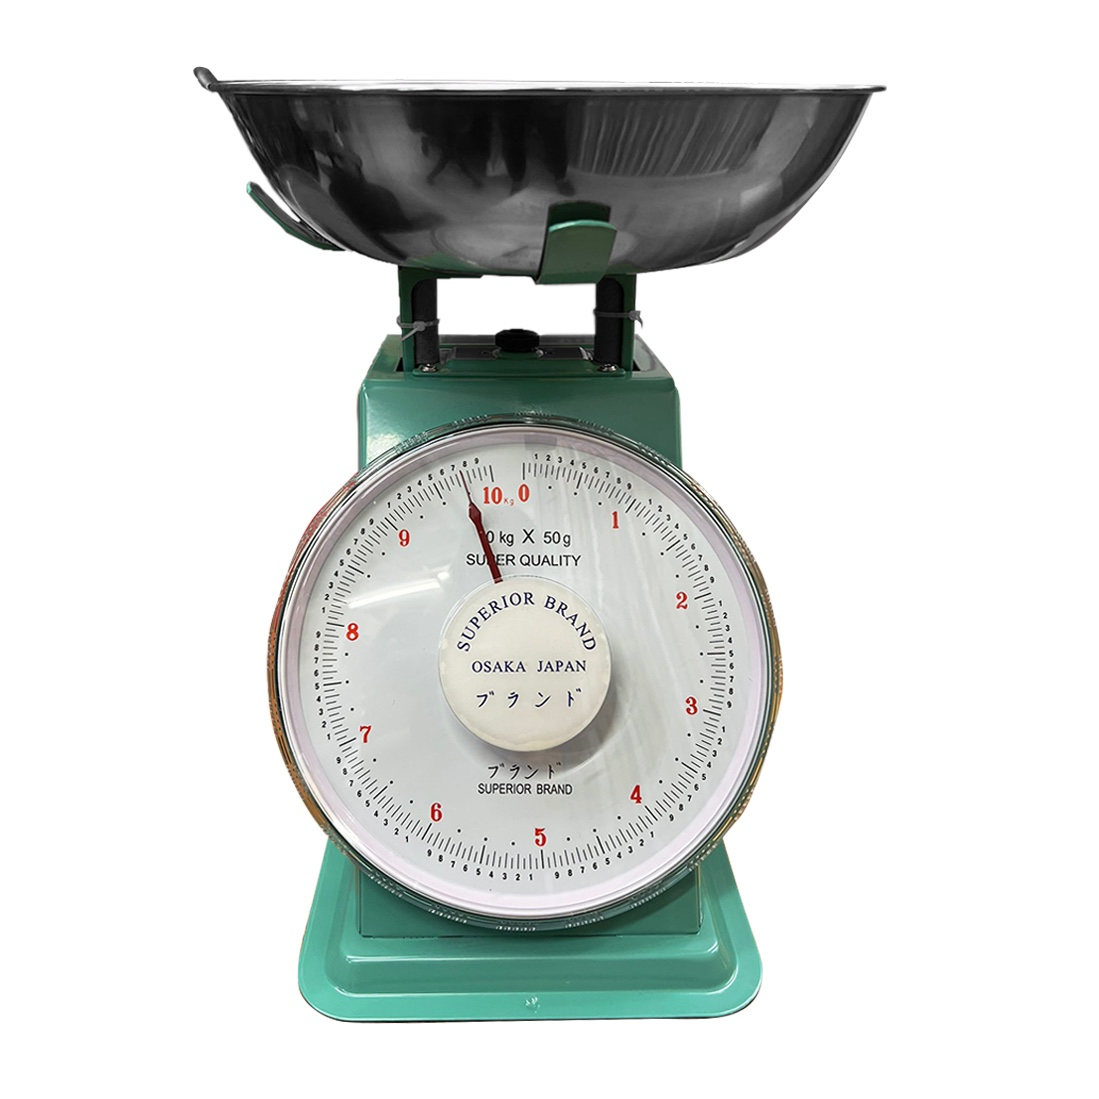 Mechanical Spring Balance WEIGHING SCALE With Tray